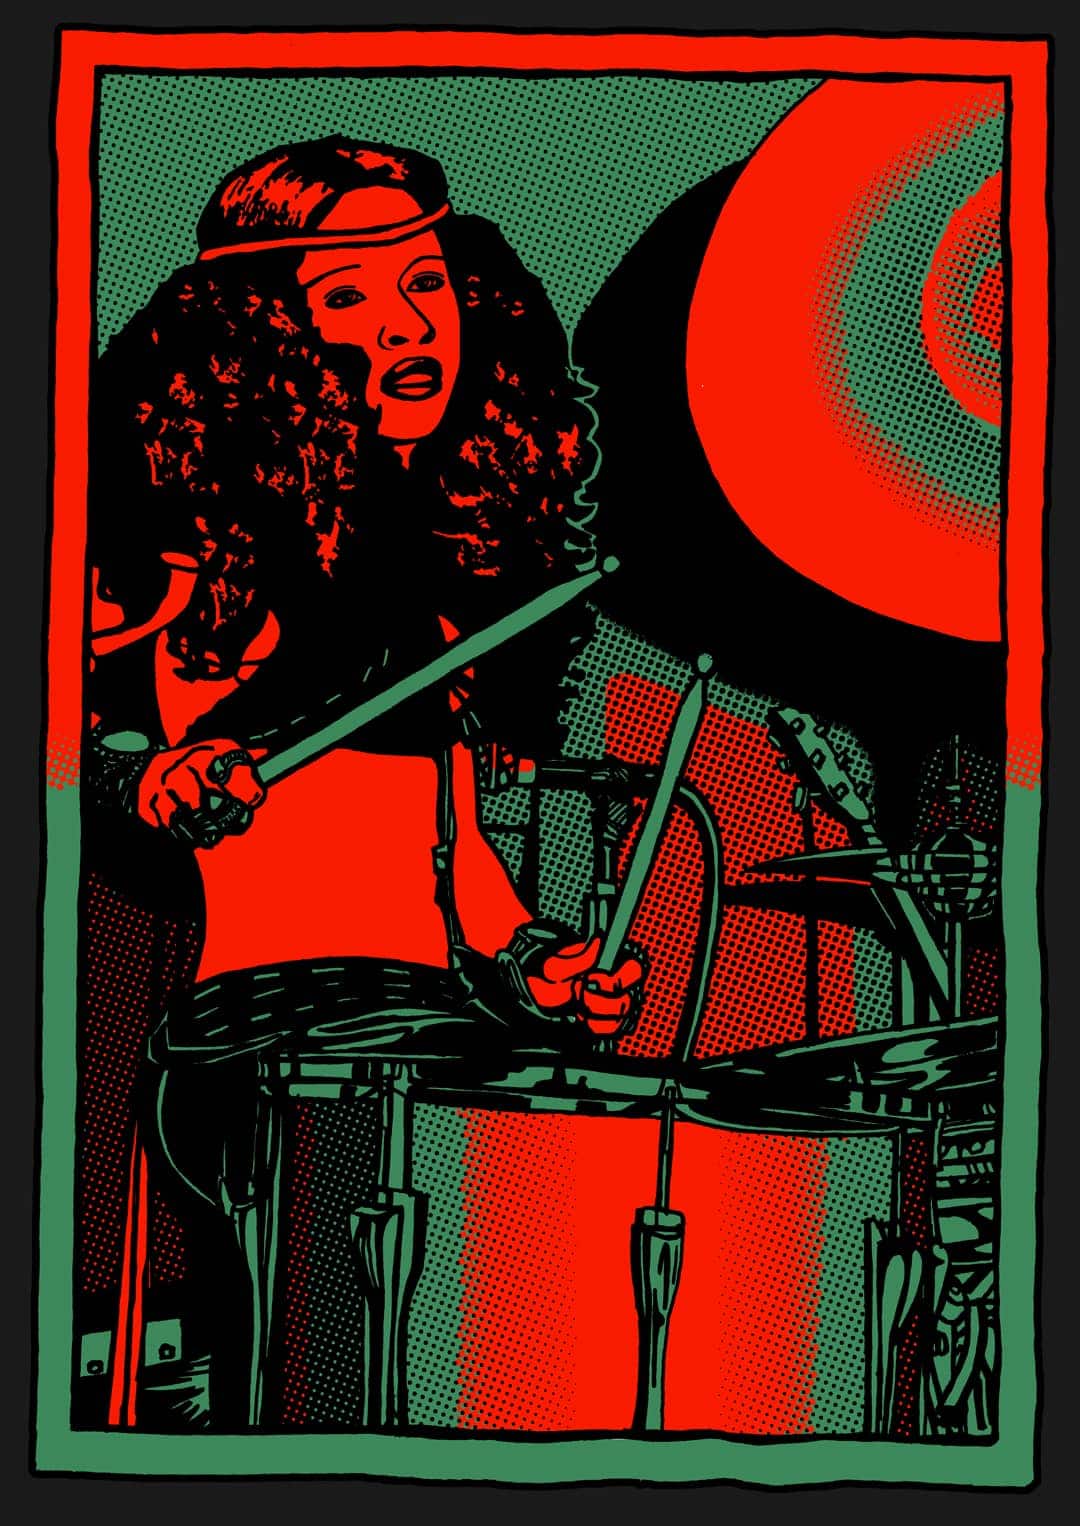 Chaka Khan playing the drums in the band Rufus fan artwork